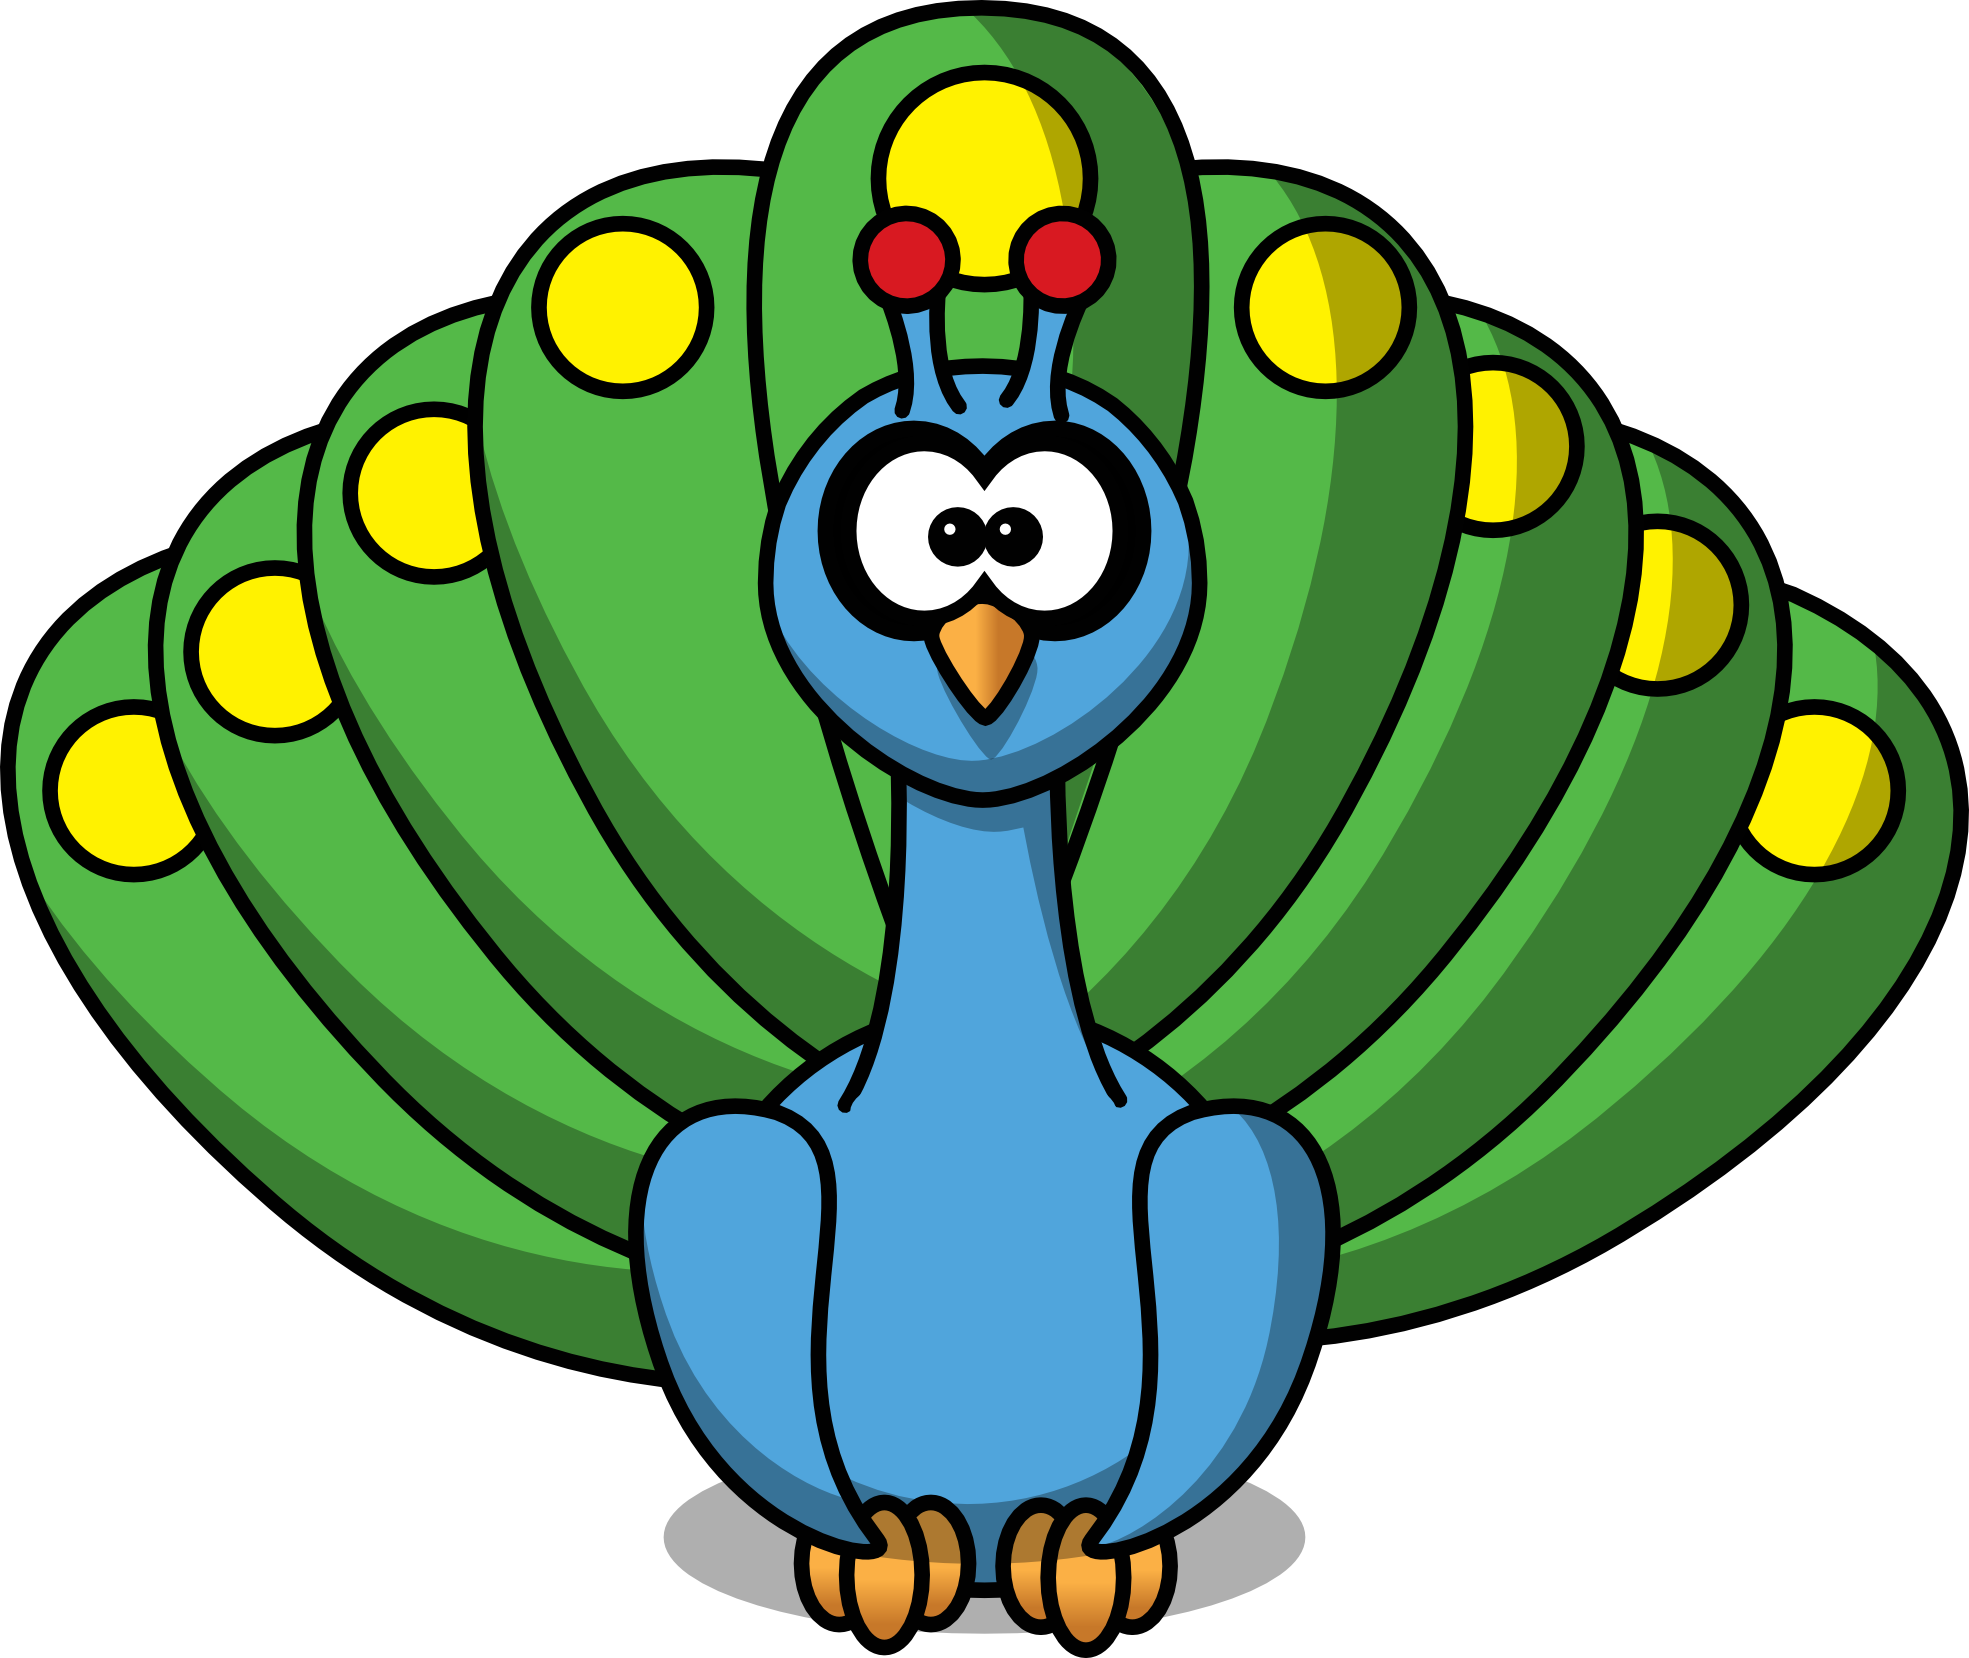 Peacock PNG Images Transparent Background | PNG Play